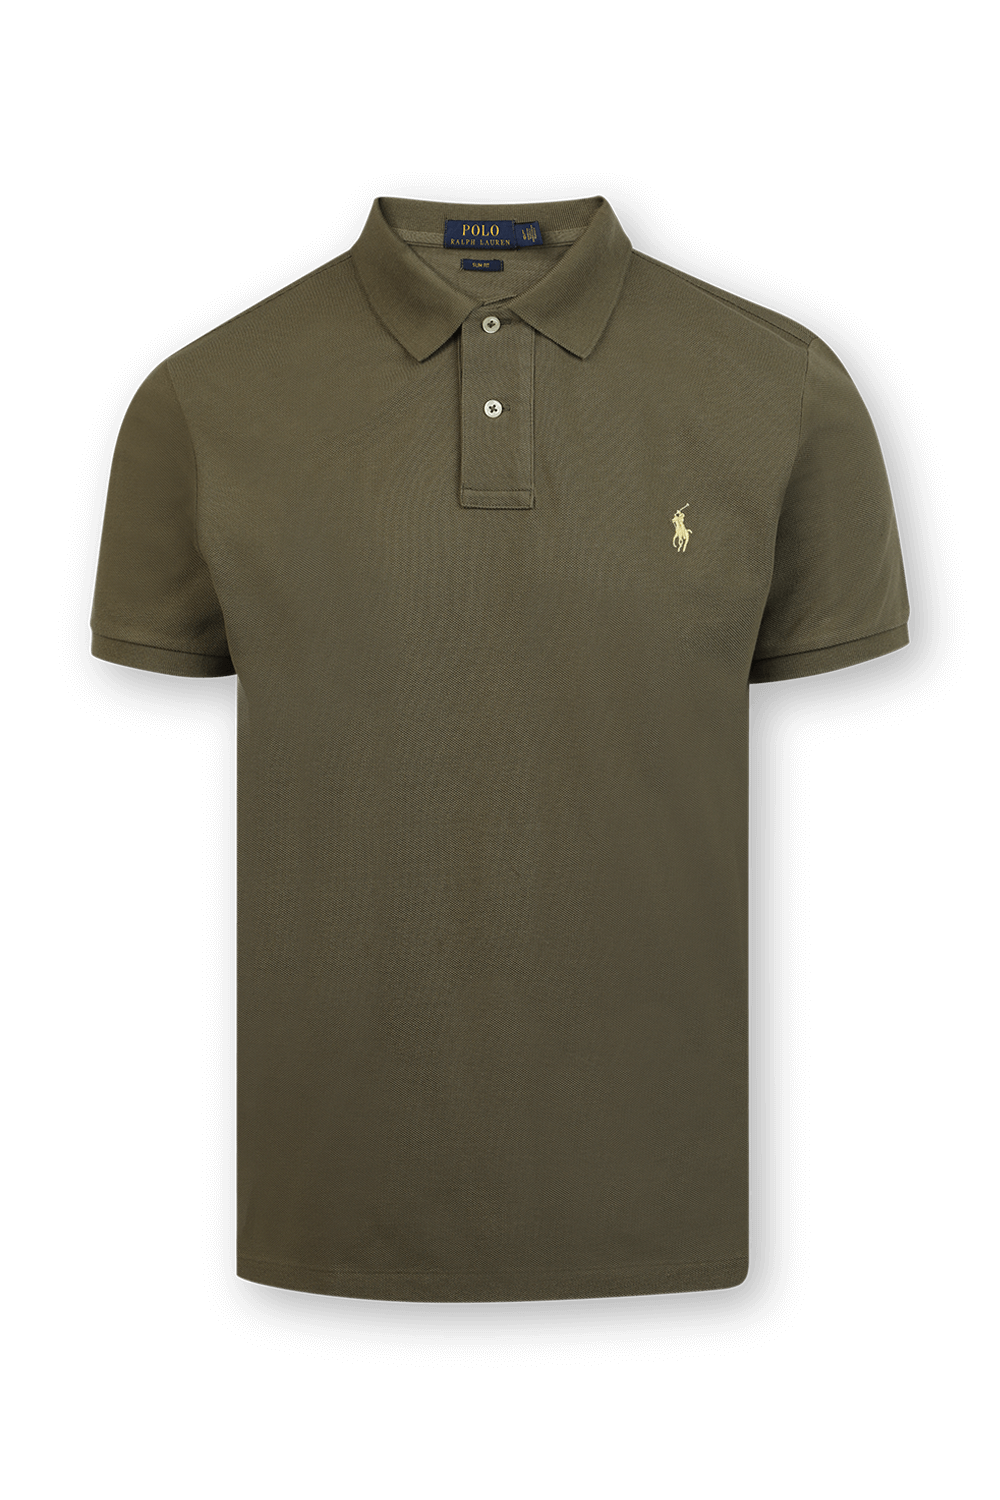 Short Sleeve Knit Polo Shirt in Olive Green POLO RALPH LAUREN